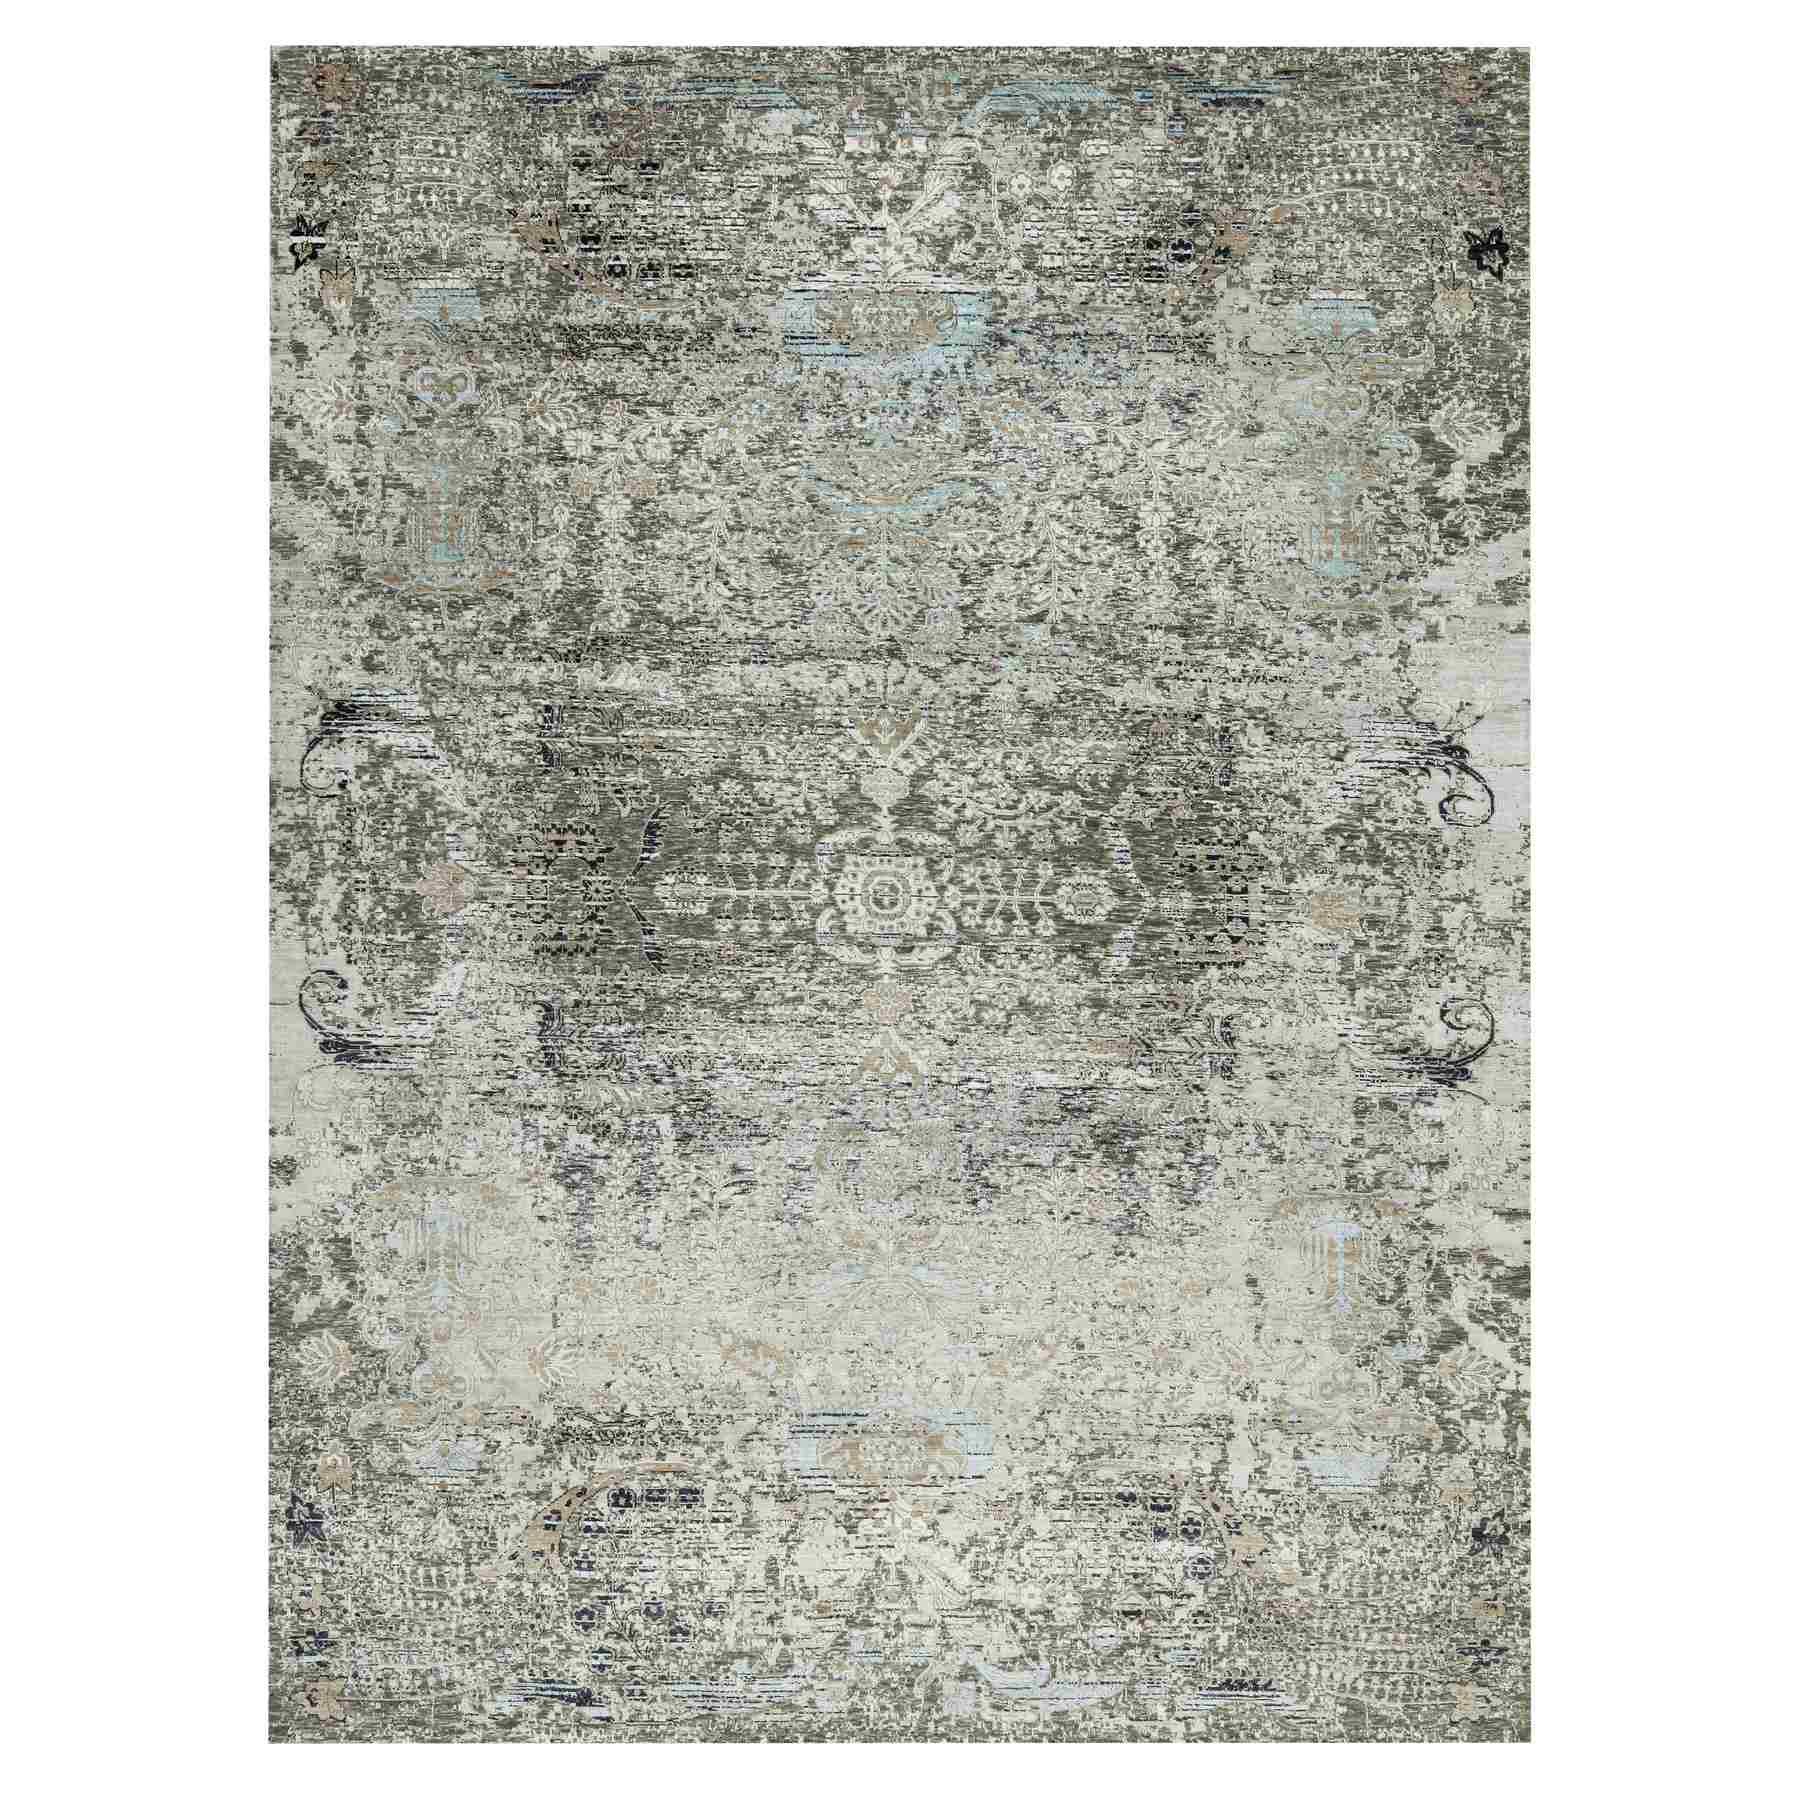 Transitional-Hand-Knotted-Rug-453490